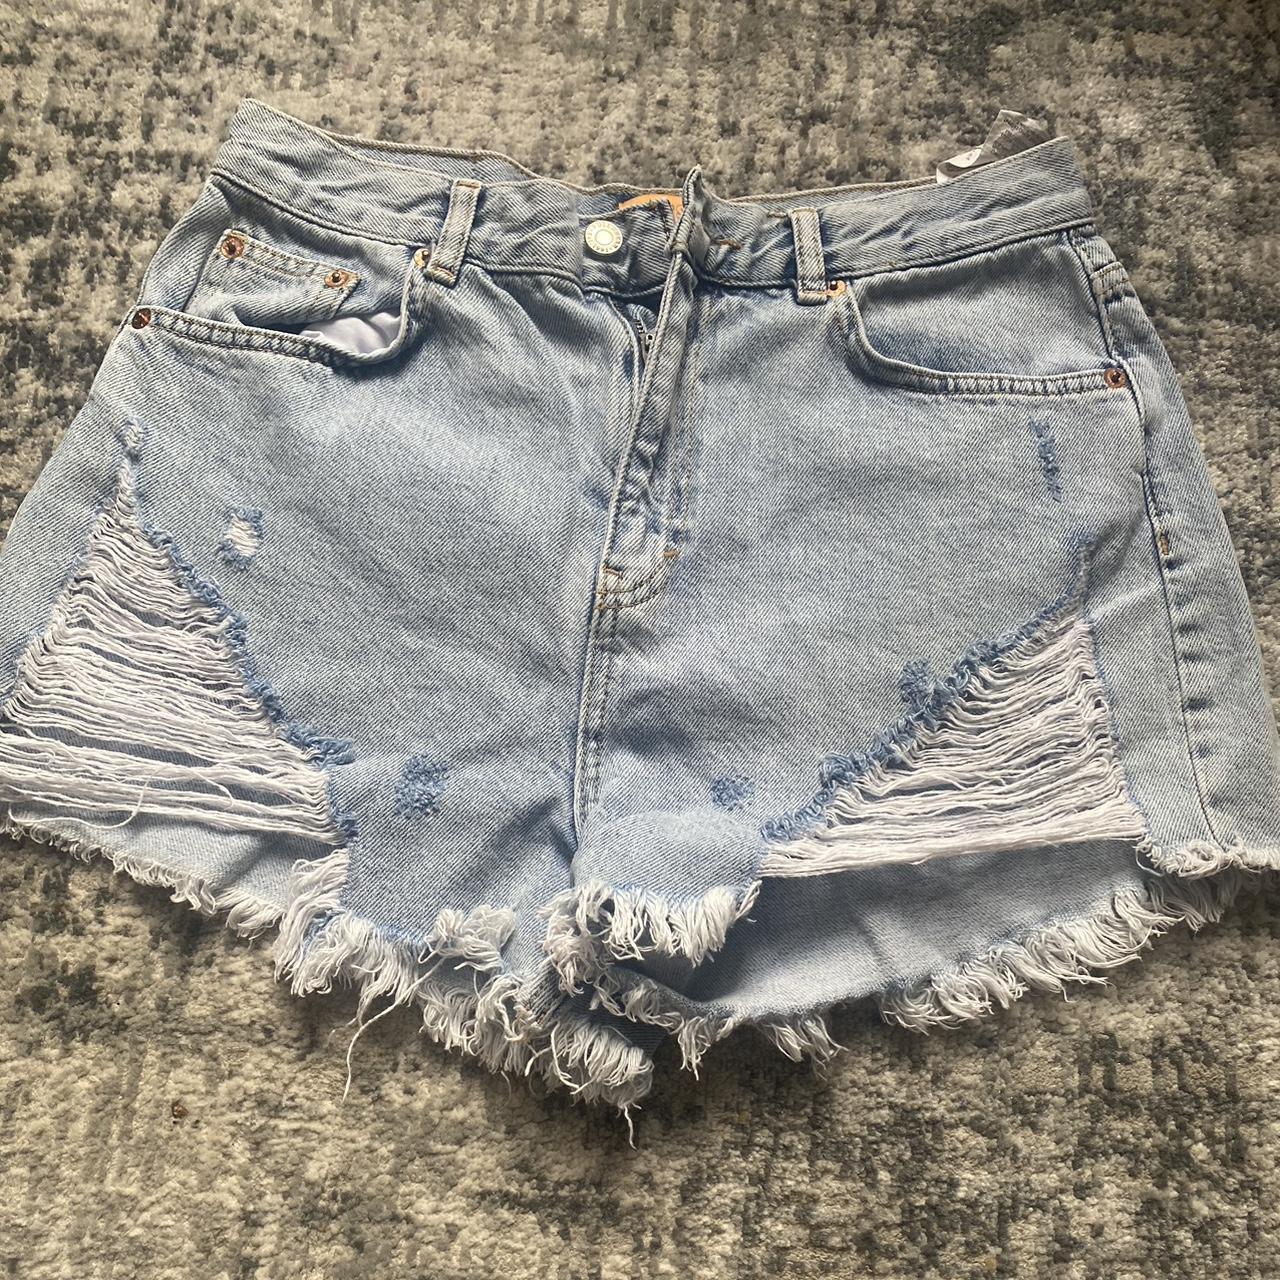 Side ripped nothing a little super glue or stitch - Depop